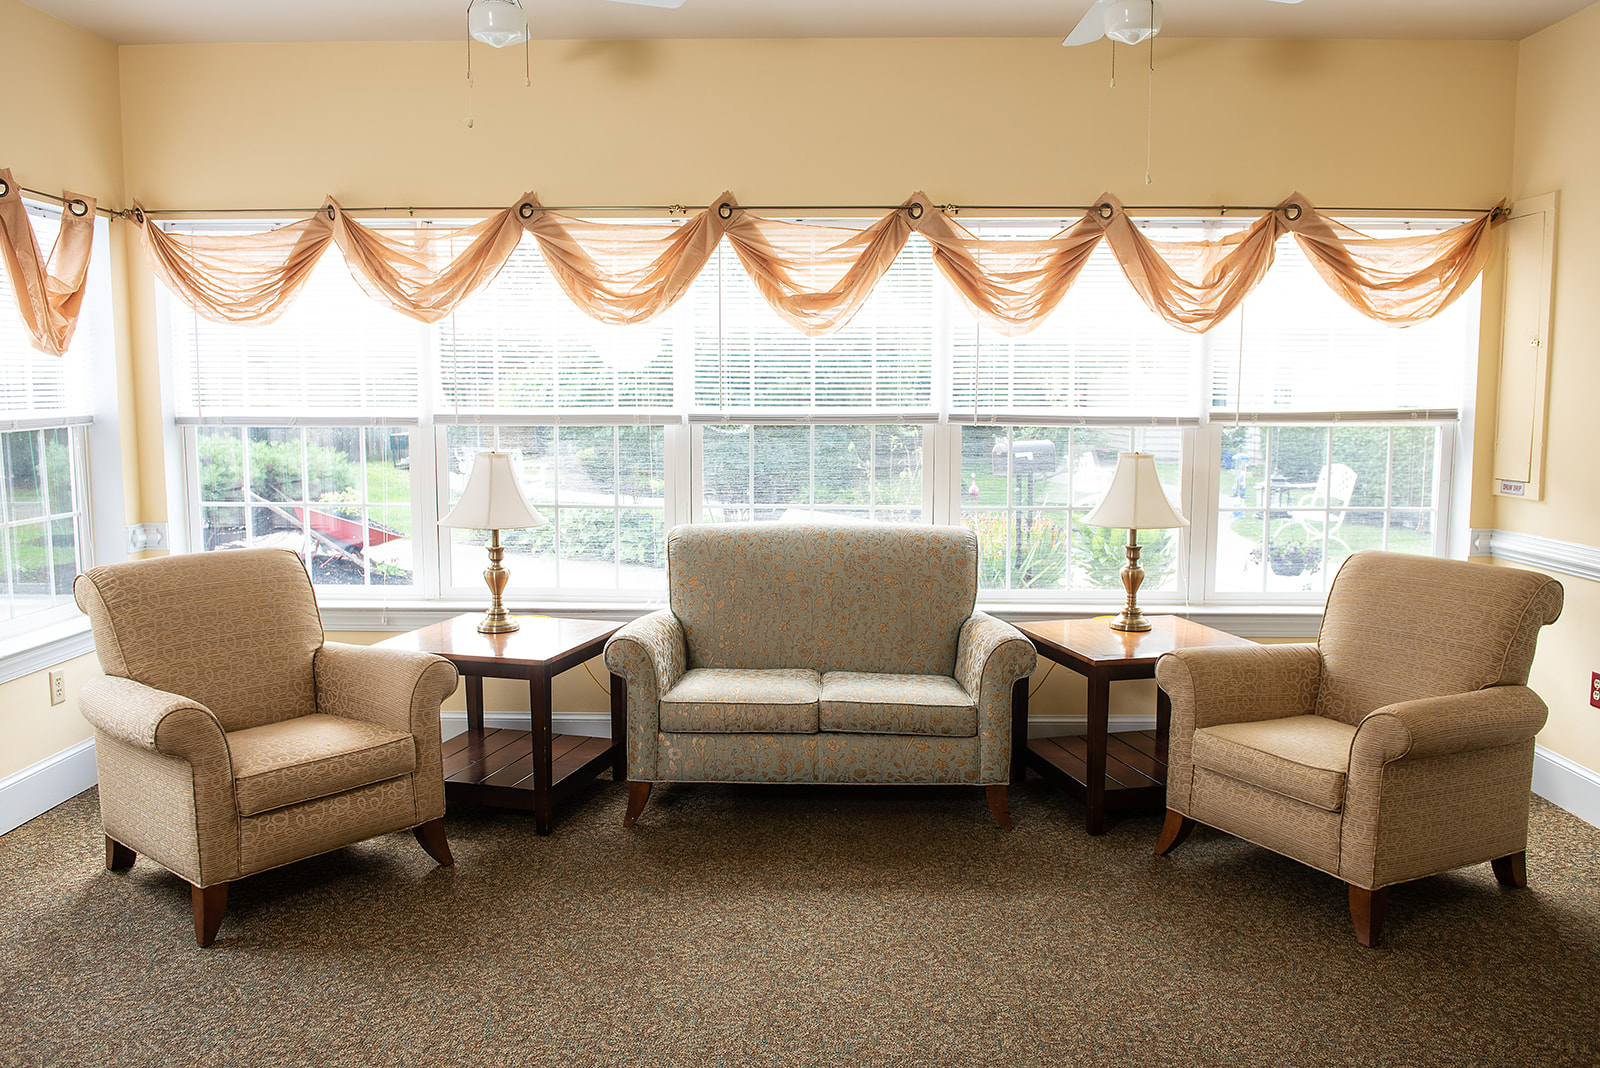 Commonwealth Senior Living at Hagerstown image